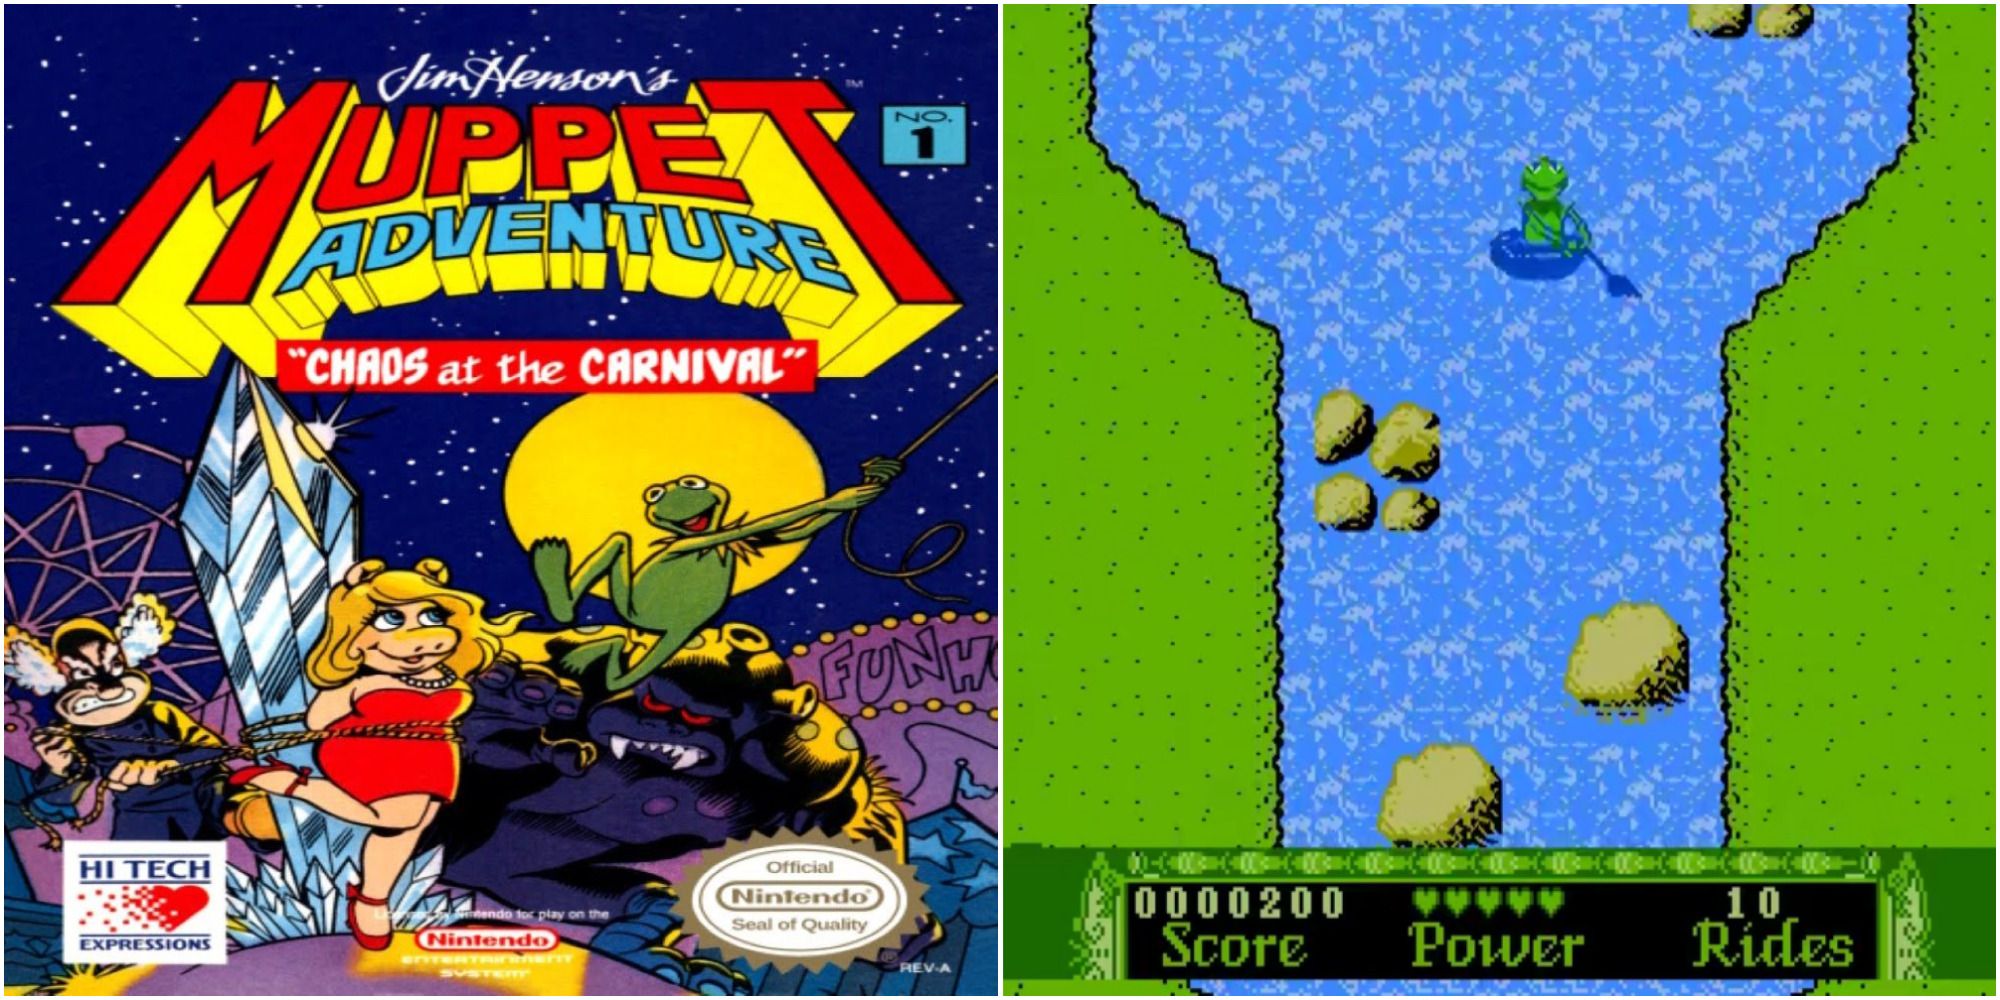 Split image Muppet Adventure Chaos at the Carnival Game Cover for the Nintendo Entertainment System with Kermit rescuing Miss Piggy and Kermit River Ride Gameplay